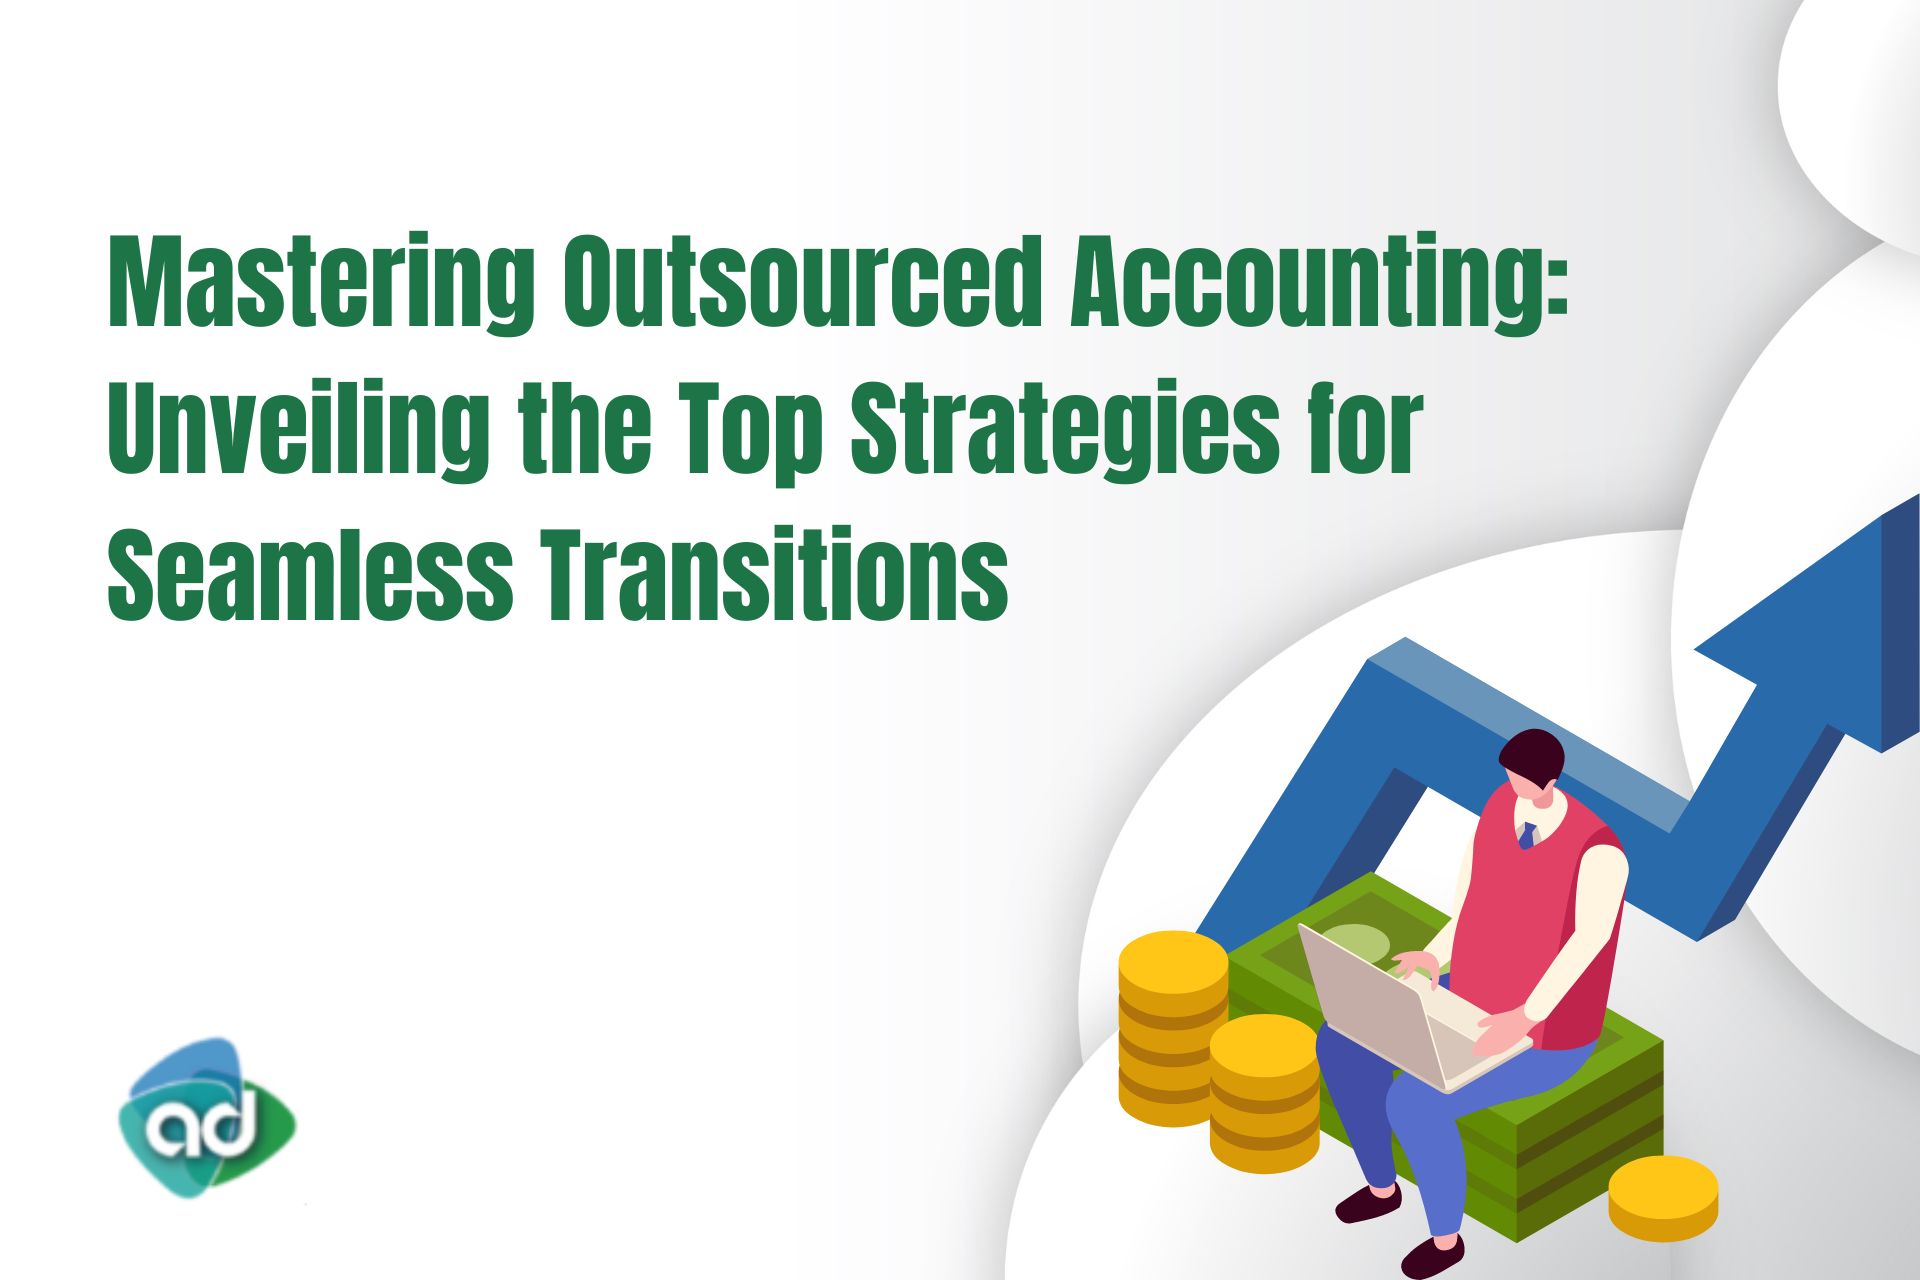 Mastering Outsourced Accounting: Unveiling the Top Strategies for Seamless Transitions